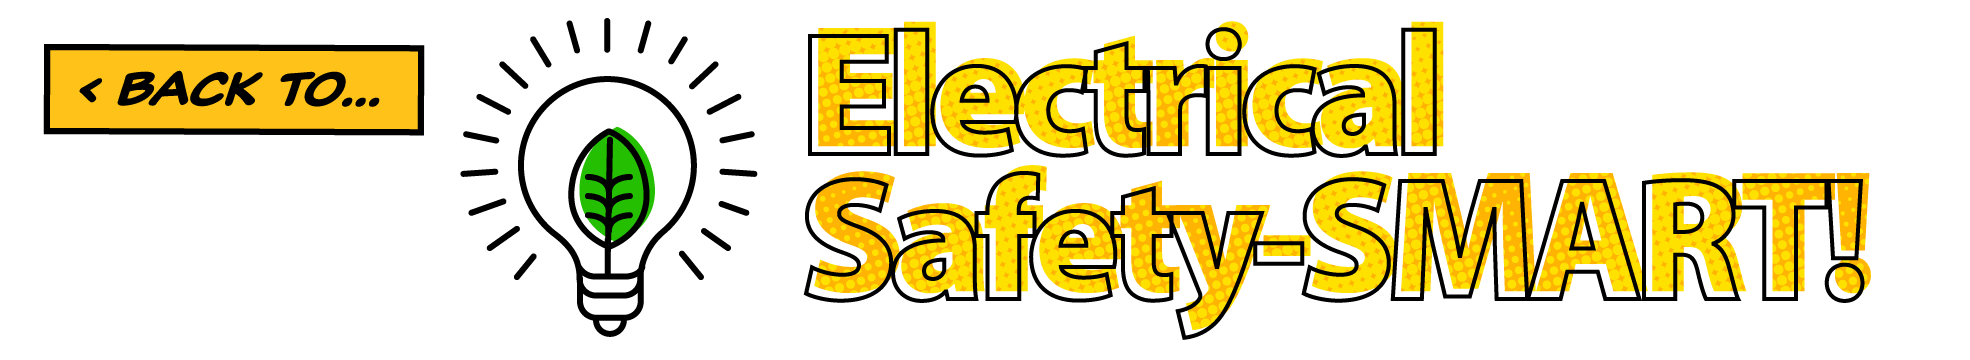 Back to… Electrical Safety-SMART!